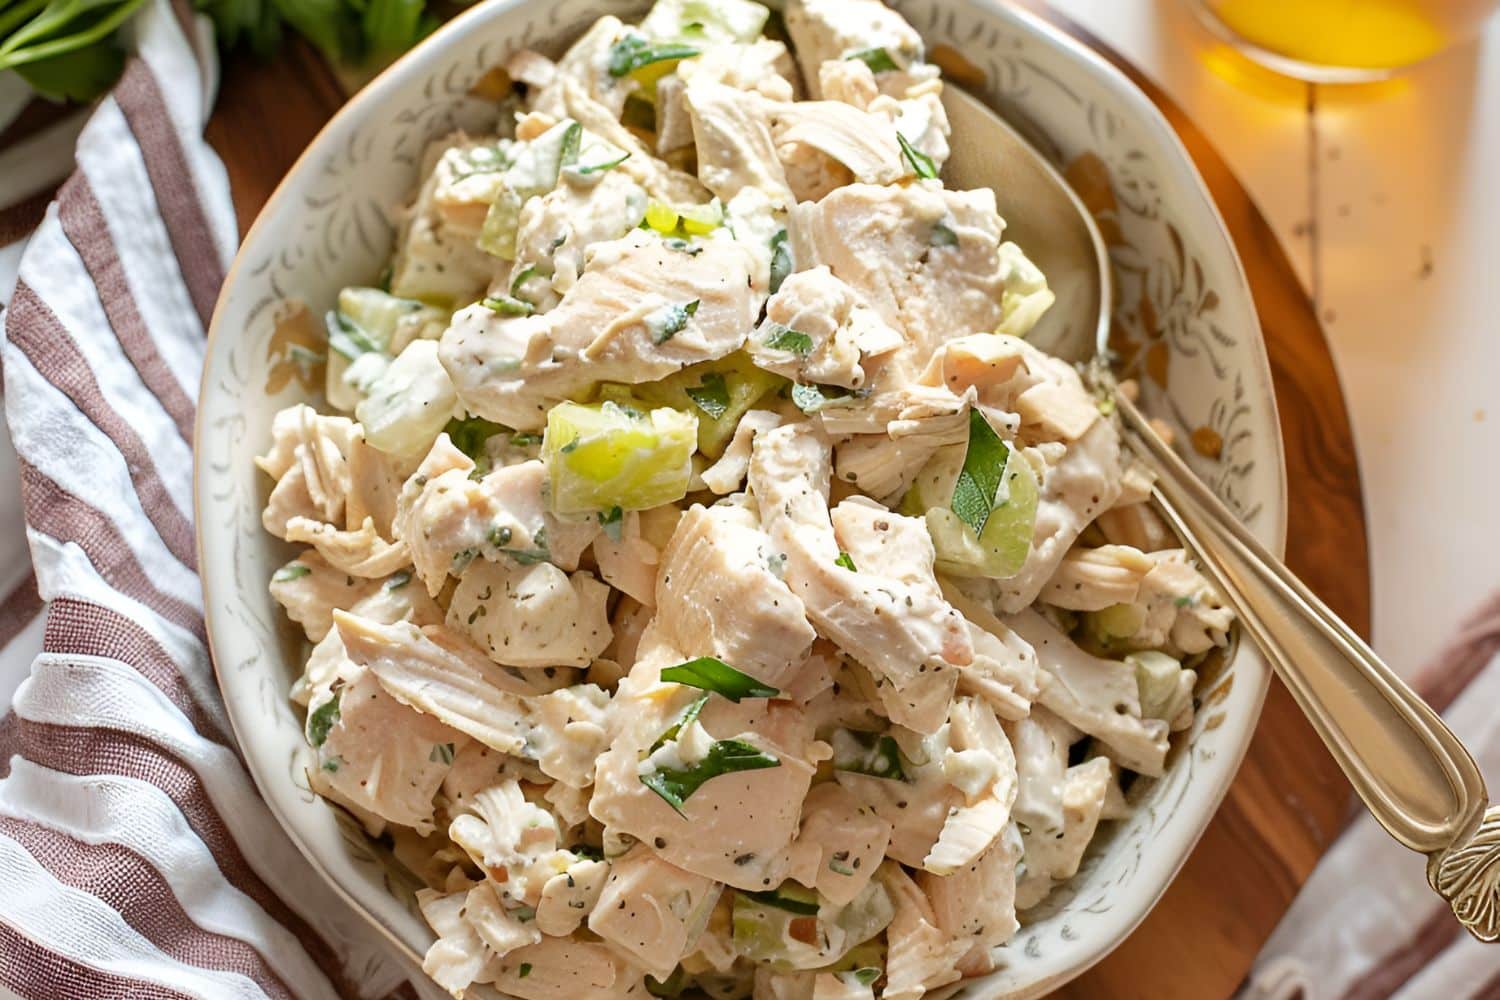 Top View of Ina Garten's Chicken Salad in a White, Patterned Bowl with a Spoon on a Wooden Cutting Board on a White Table with a Kitchen Towel